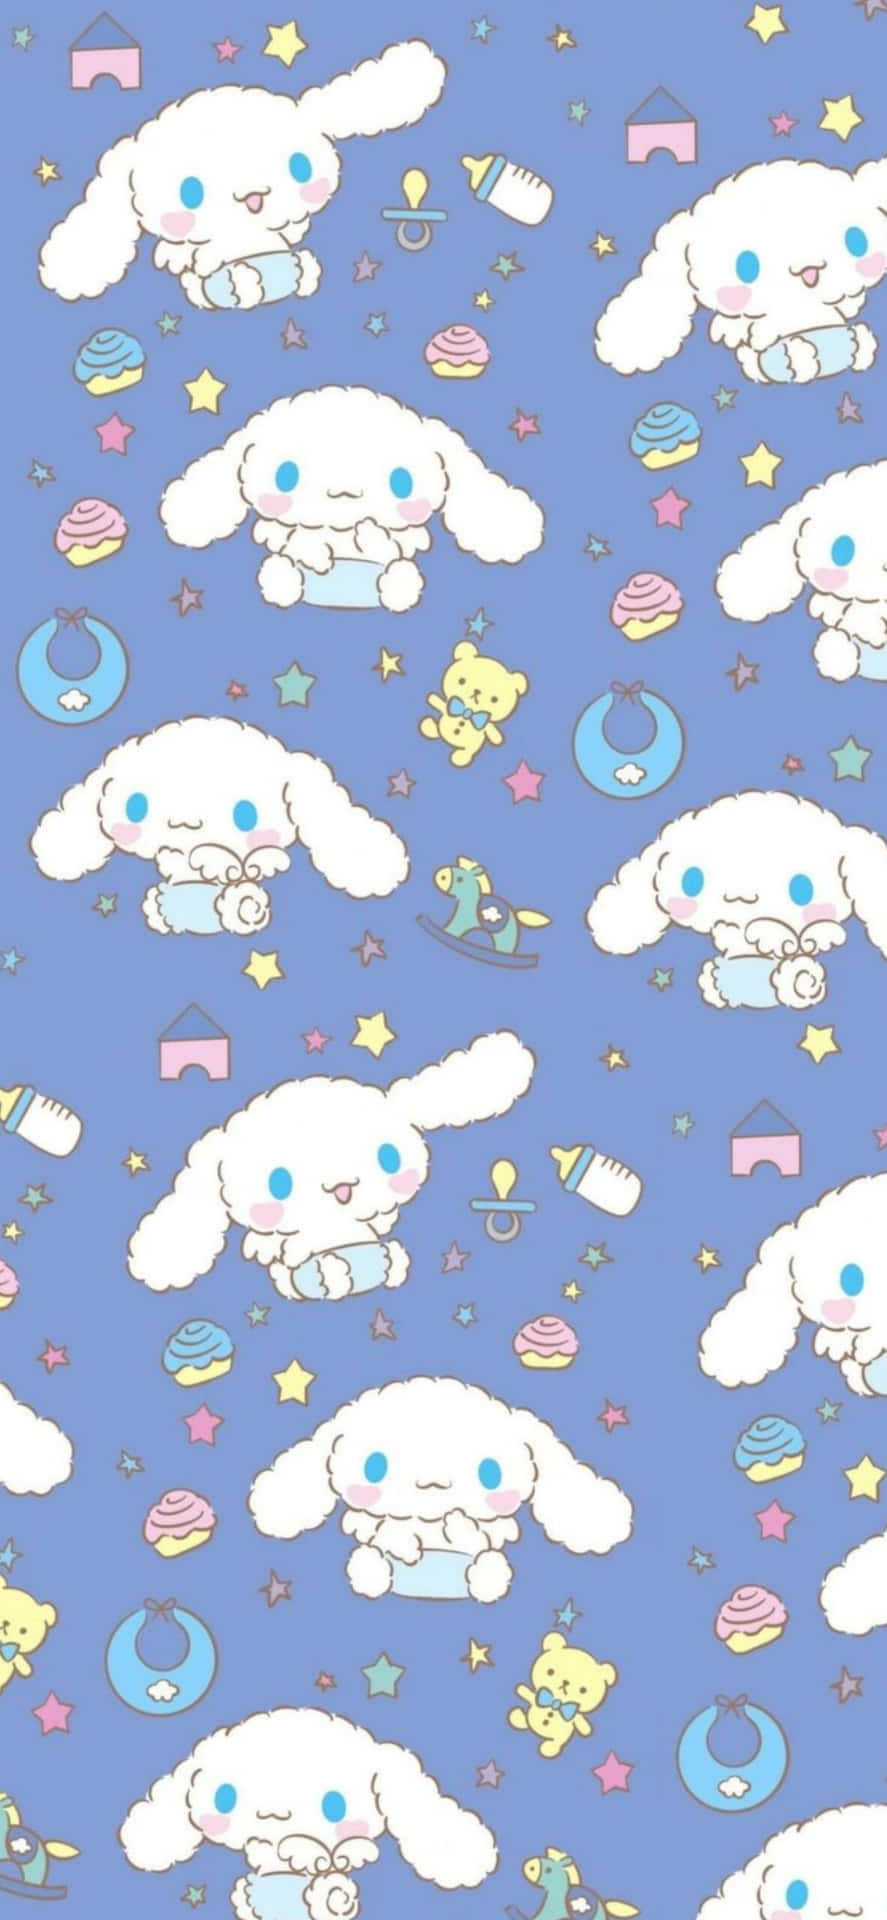 Download A Pattern With A White Kawaii Teddy Bear Wallpaper